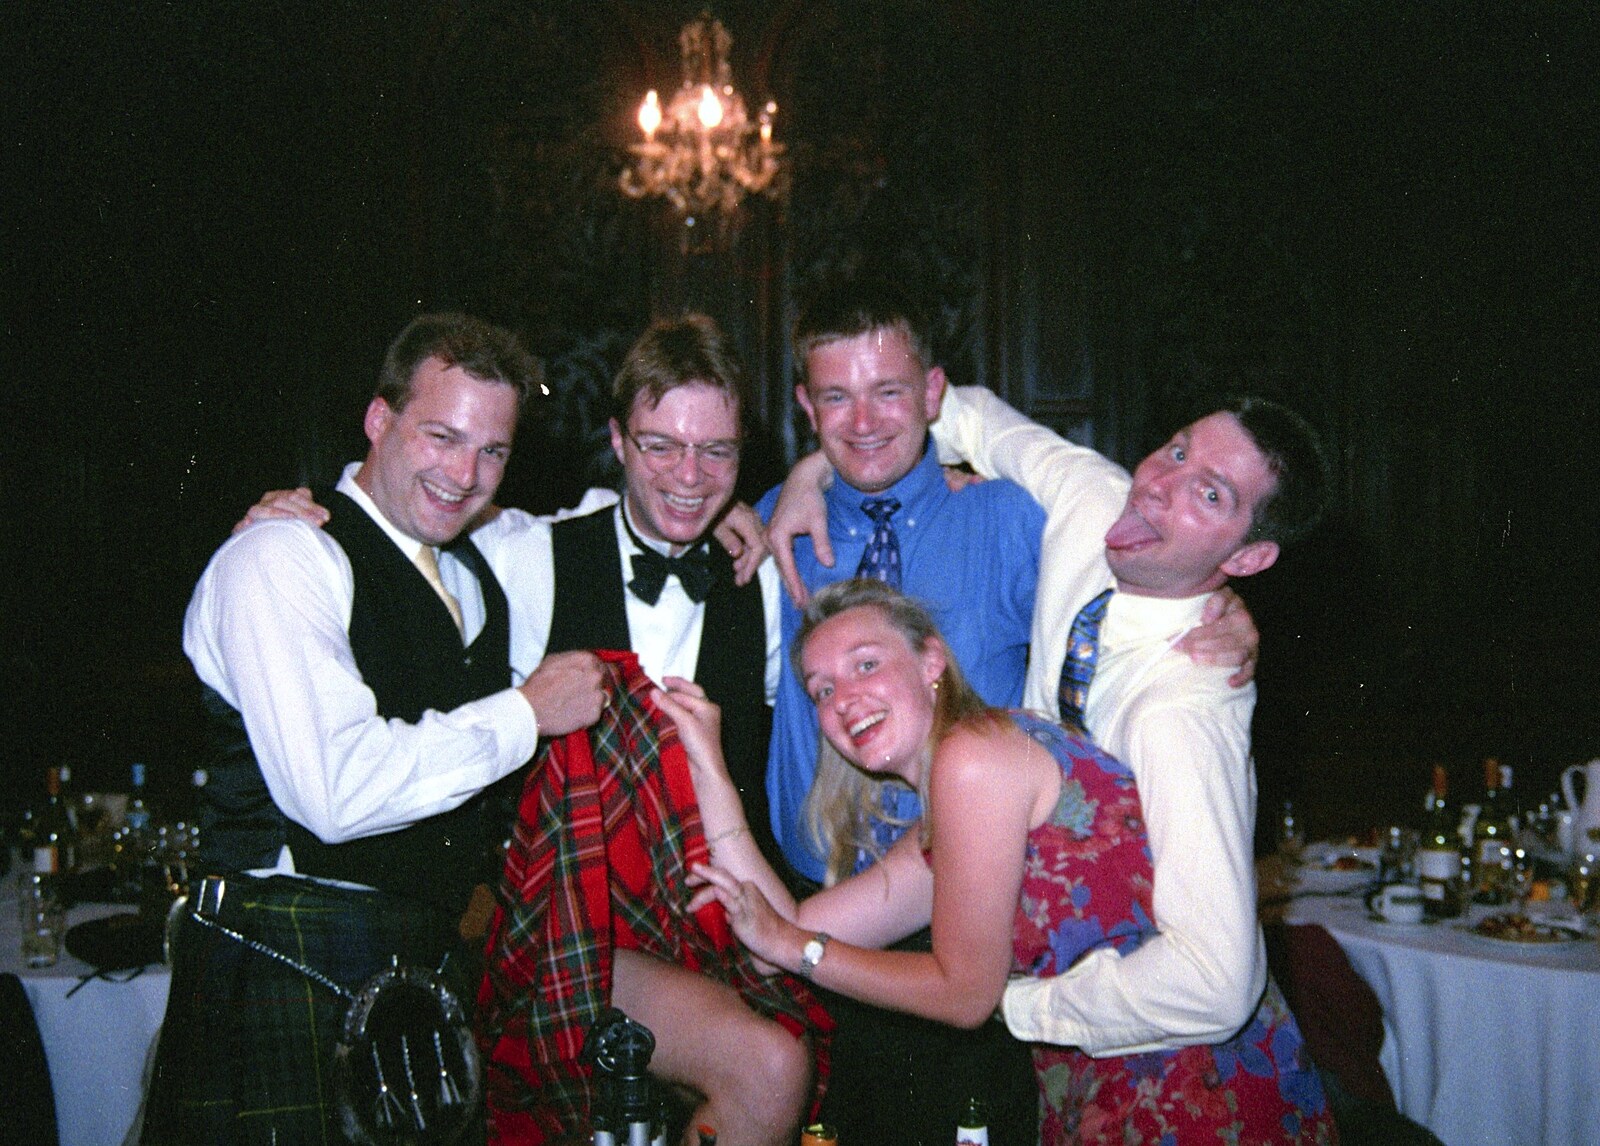 Hamish and Jane's Wedding, Canford School, Wimborne, Dorset - 5th August 1998: Carole has another furtle for Simon Morris's bits, whilst Martin, Nosher and Sean prop him up